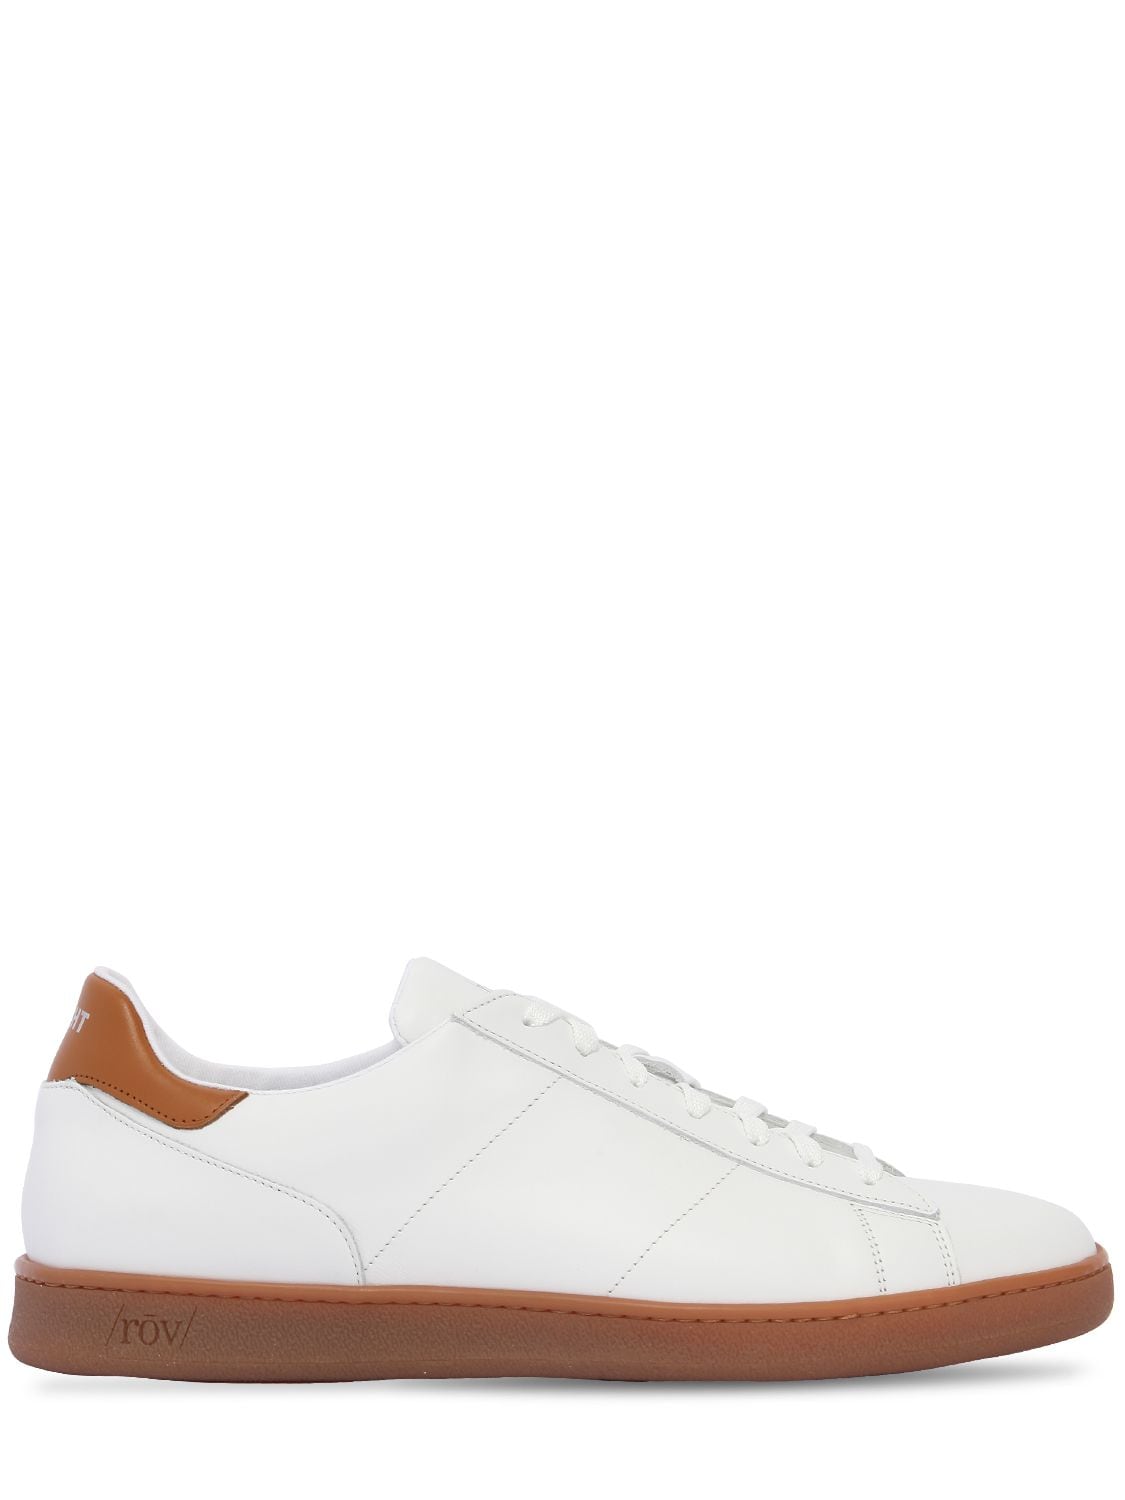 Rov Leather Honey Sole Sneakers In White/honey